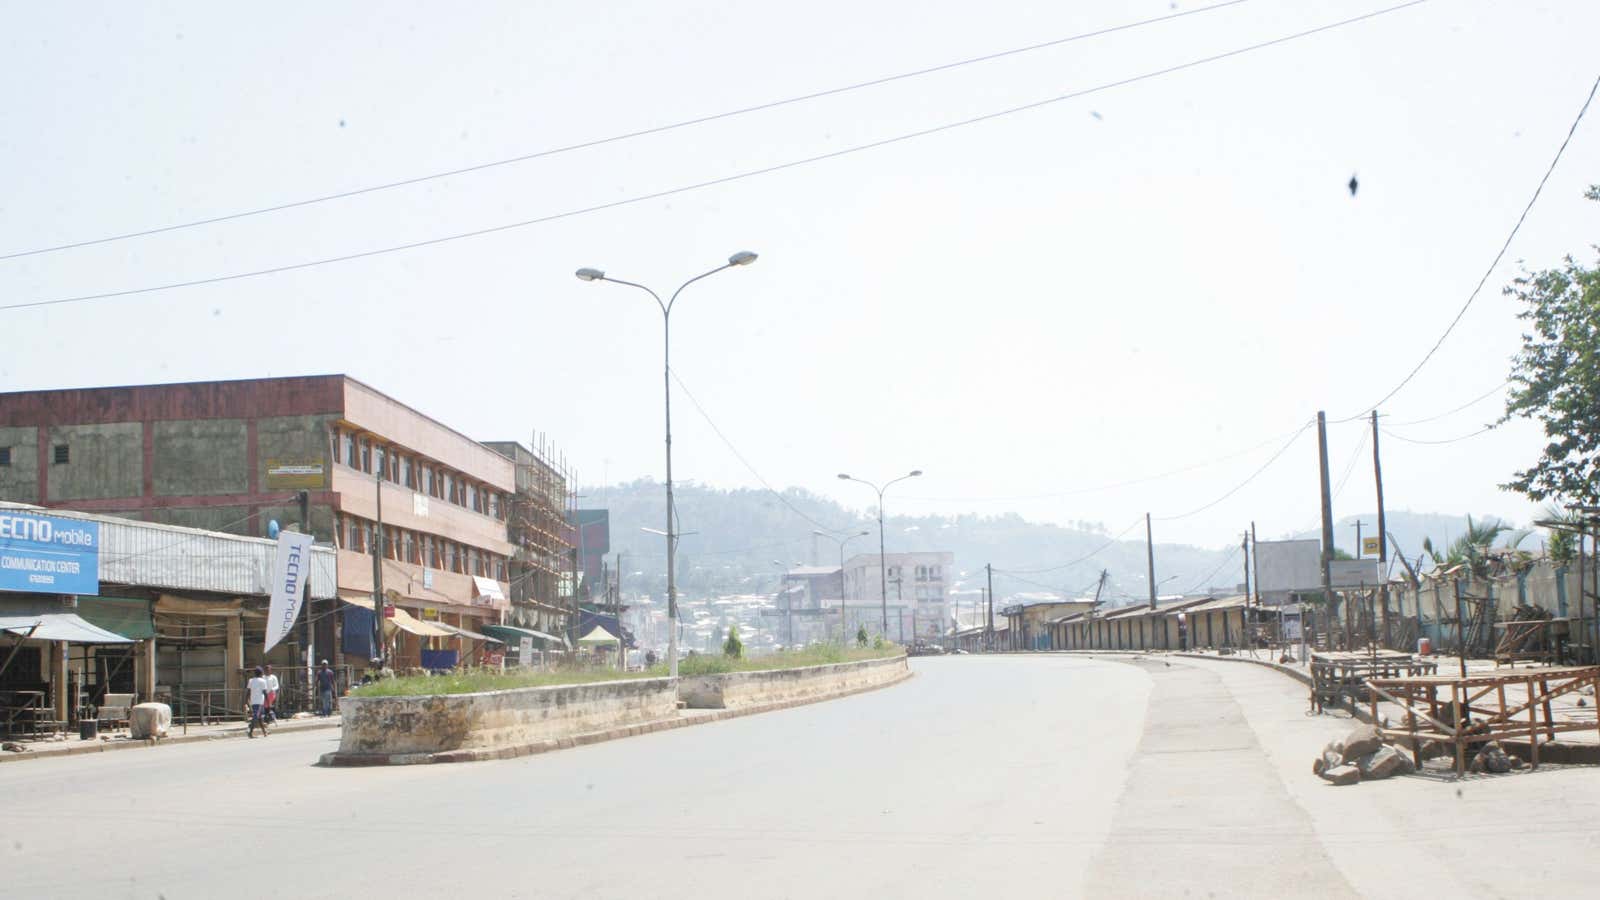 “Ghost town” – Bamenda in North West Cameroon